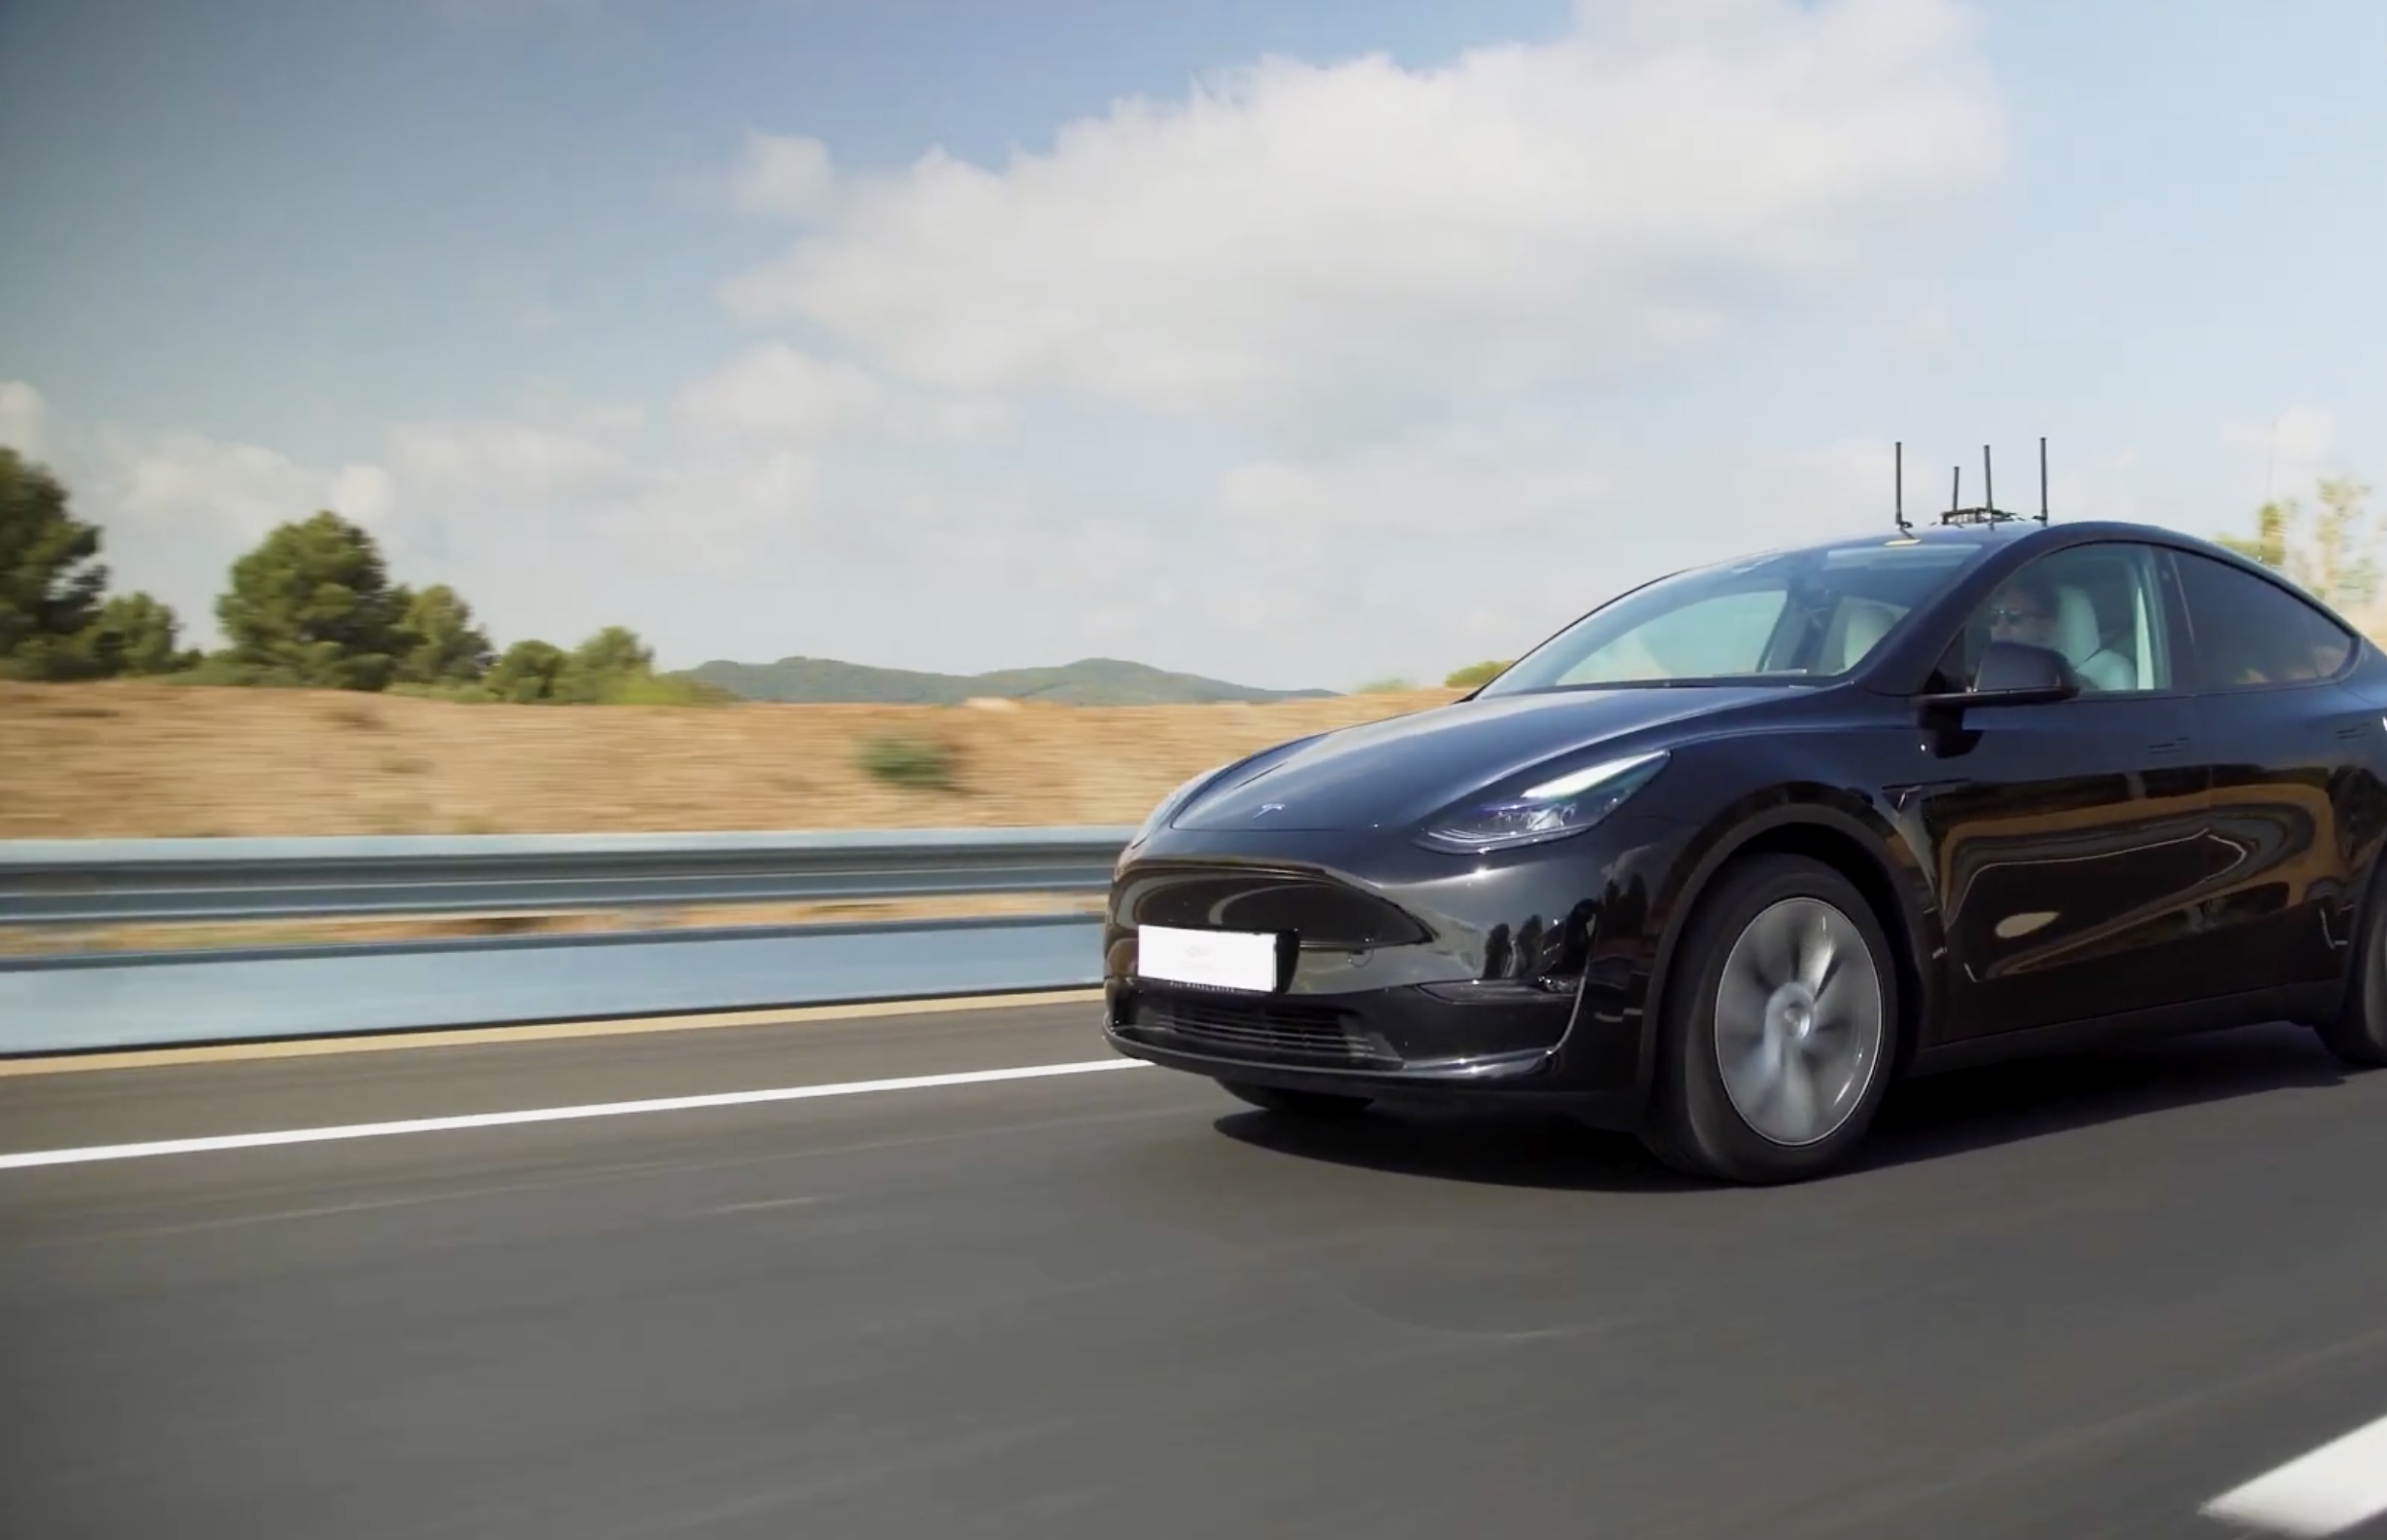 Tesla gets serious with ADAS testing in Europe